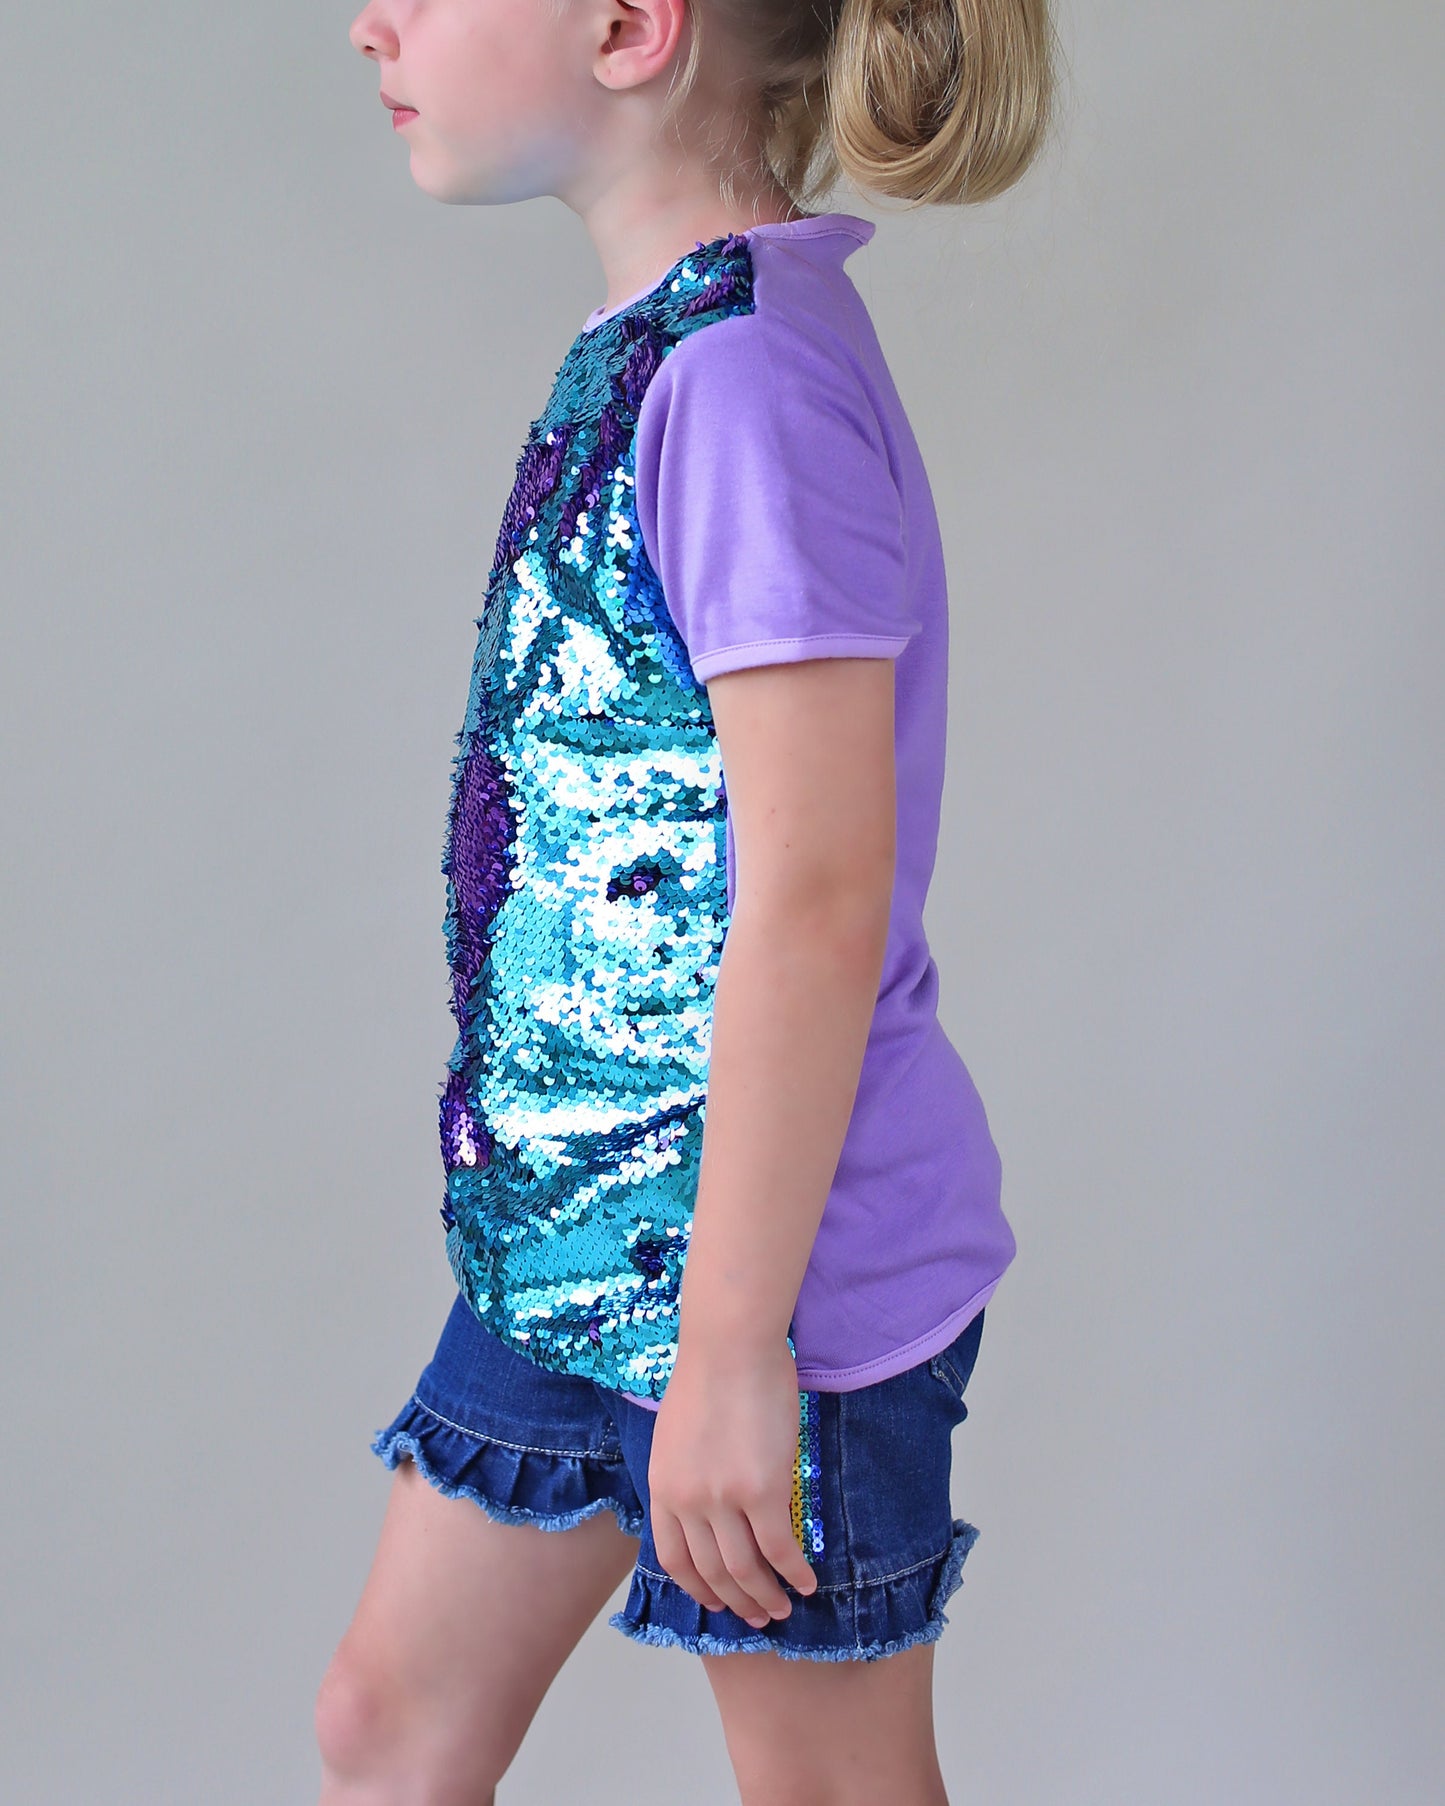 Turquoise and Lavender Reversible Sequined Shirt - Aqua and Purple flip Sequin Shirt - Lavender/Aqua Sequined Shirt - Magic Sequin Shirt